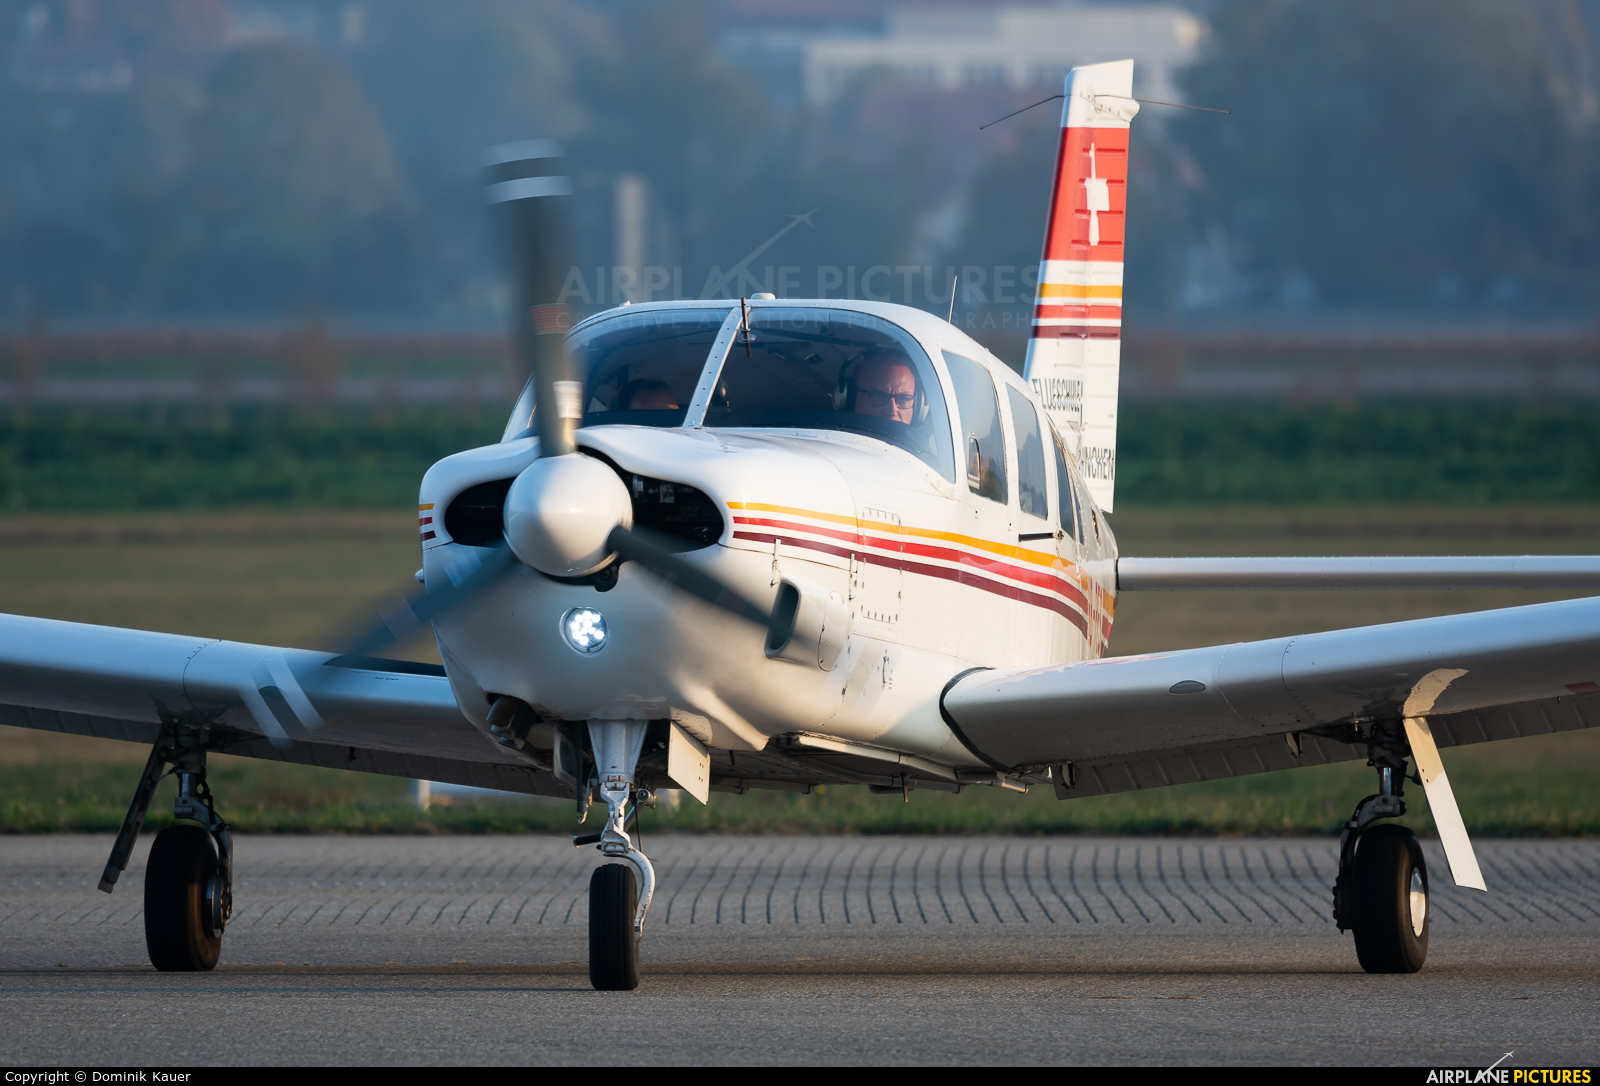 Flugschule Grenchen HB-PES aircraft at Grenchen